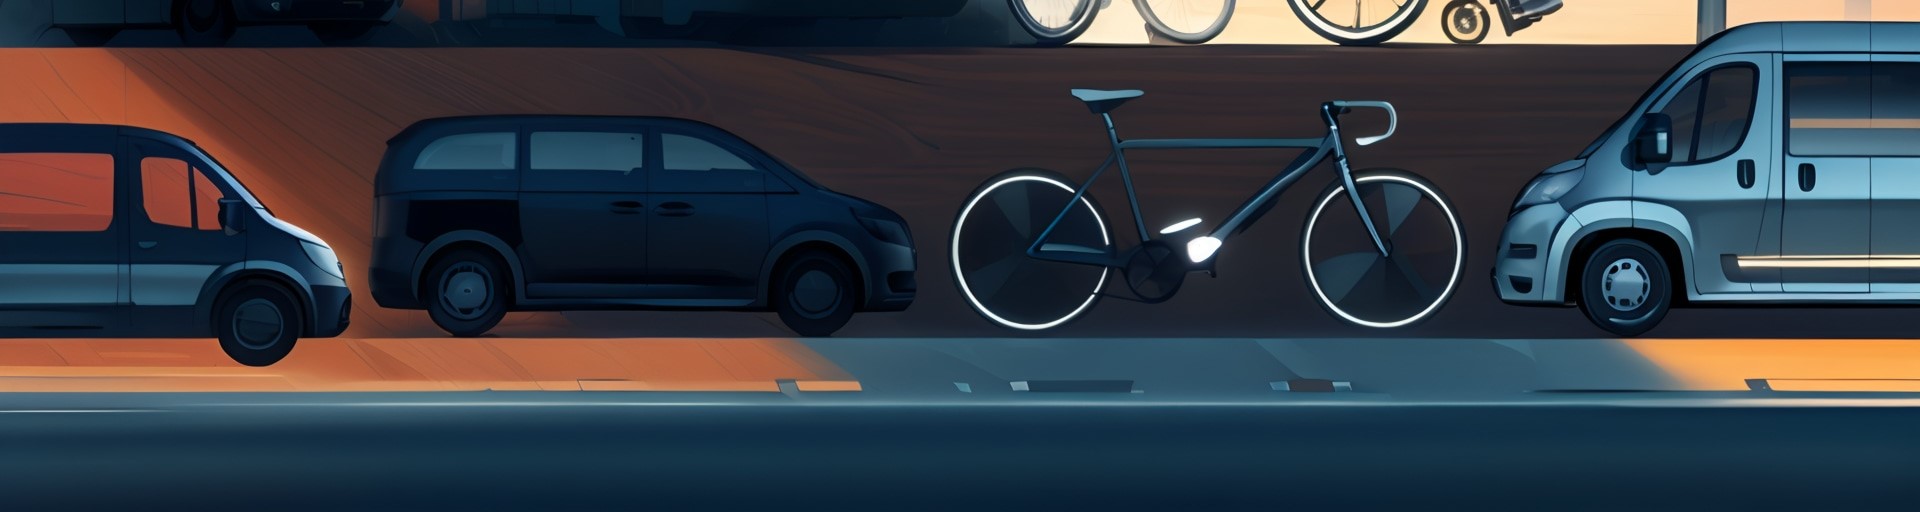 An abstract orange and black image depicting vehicles and a bicycle